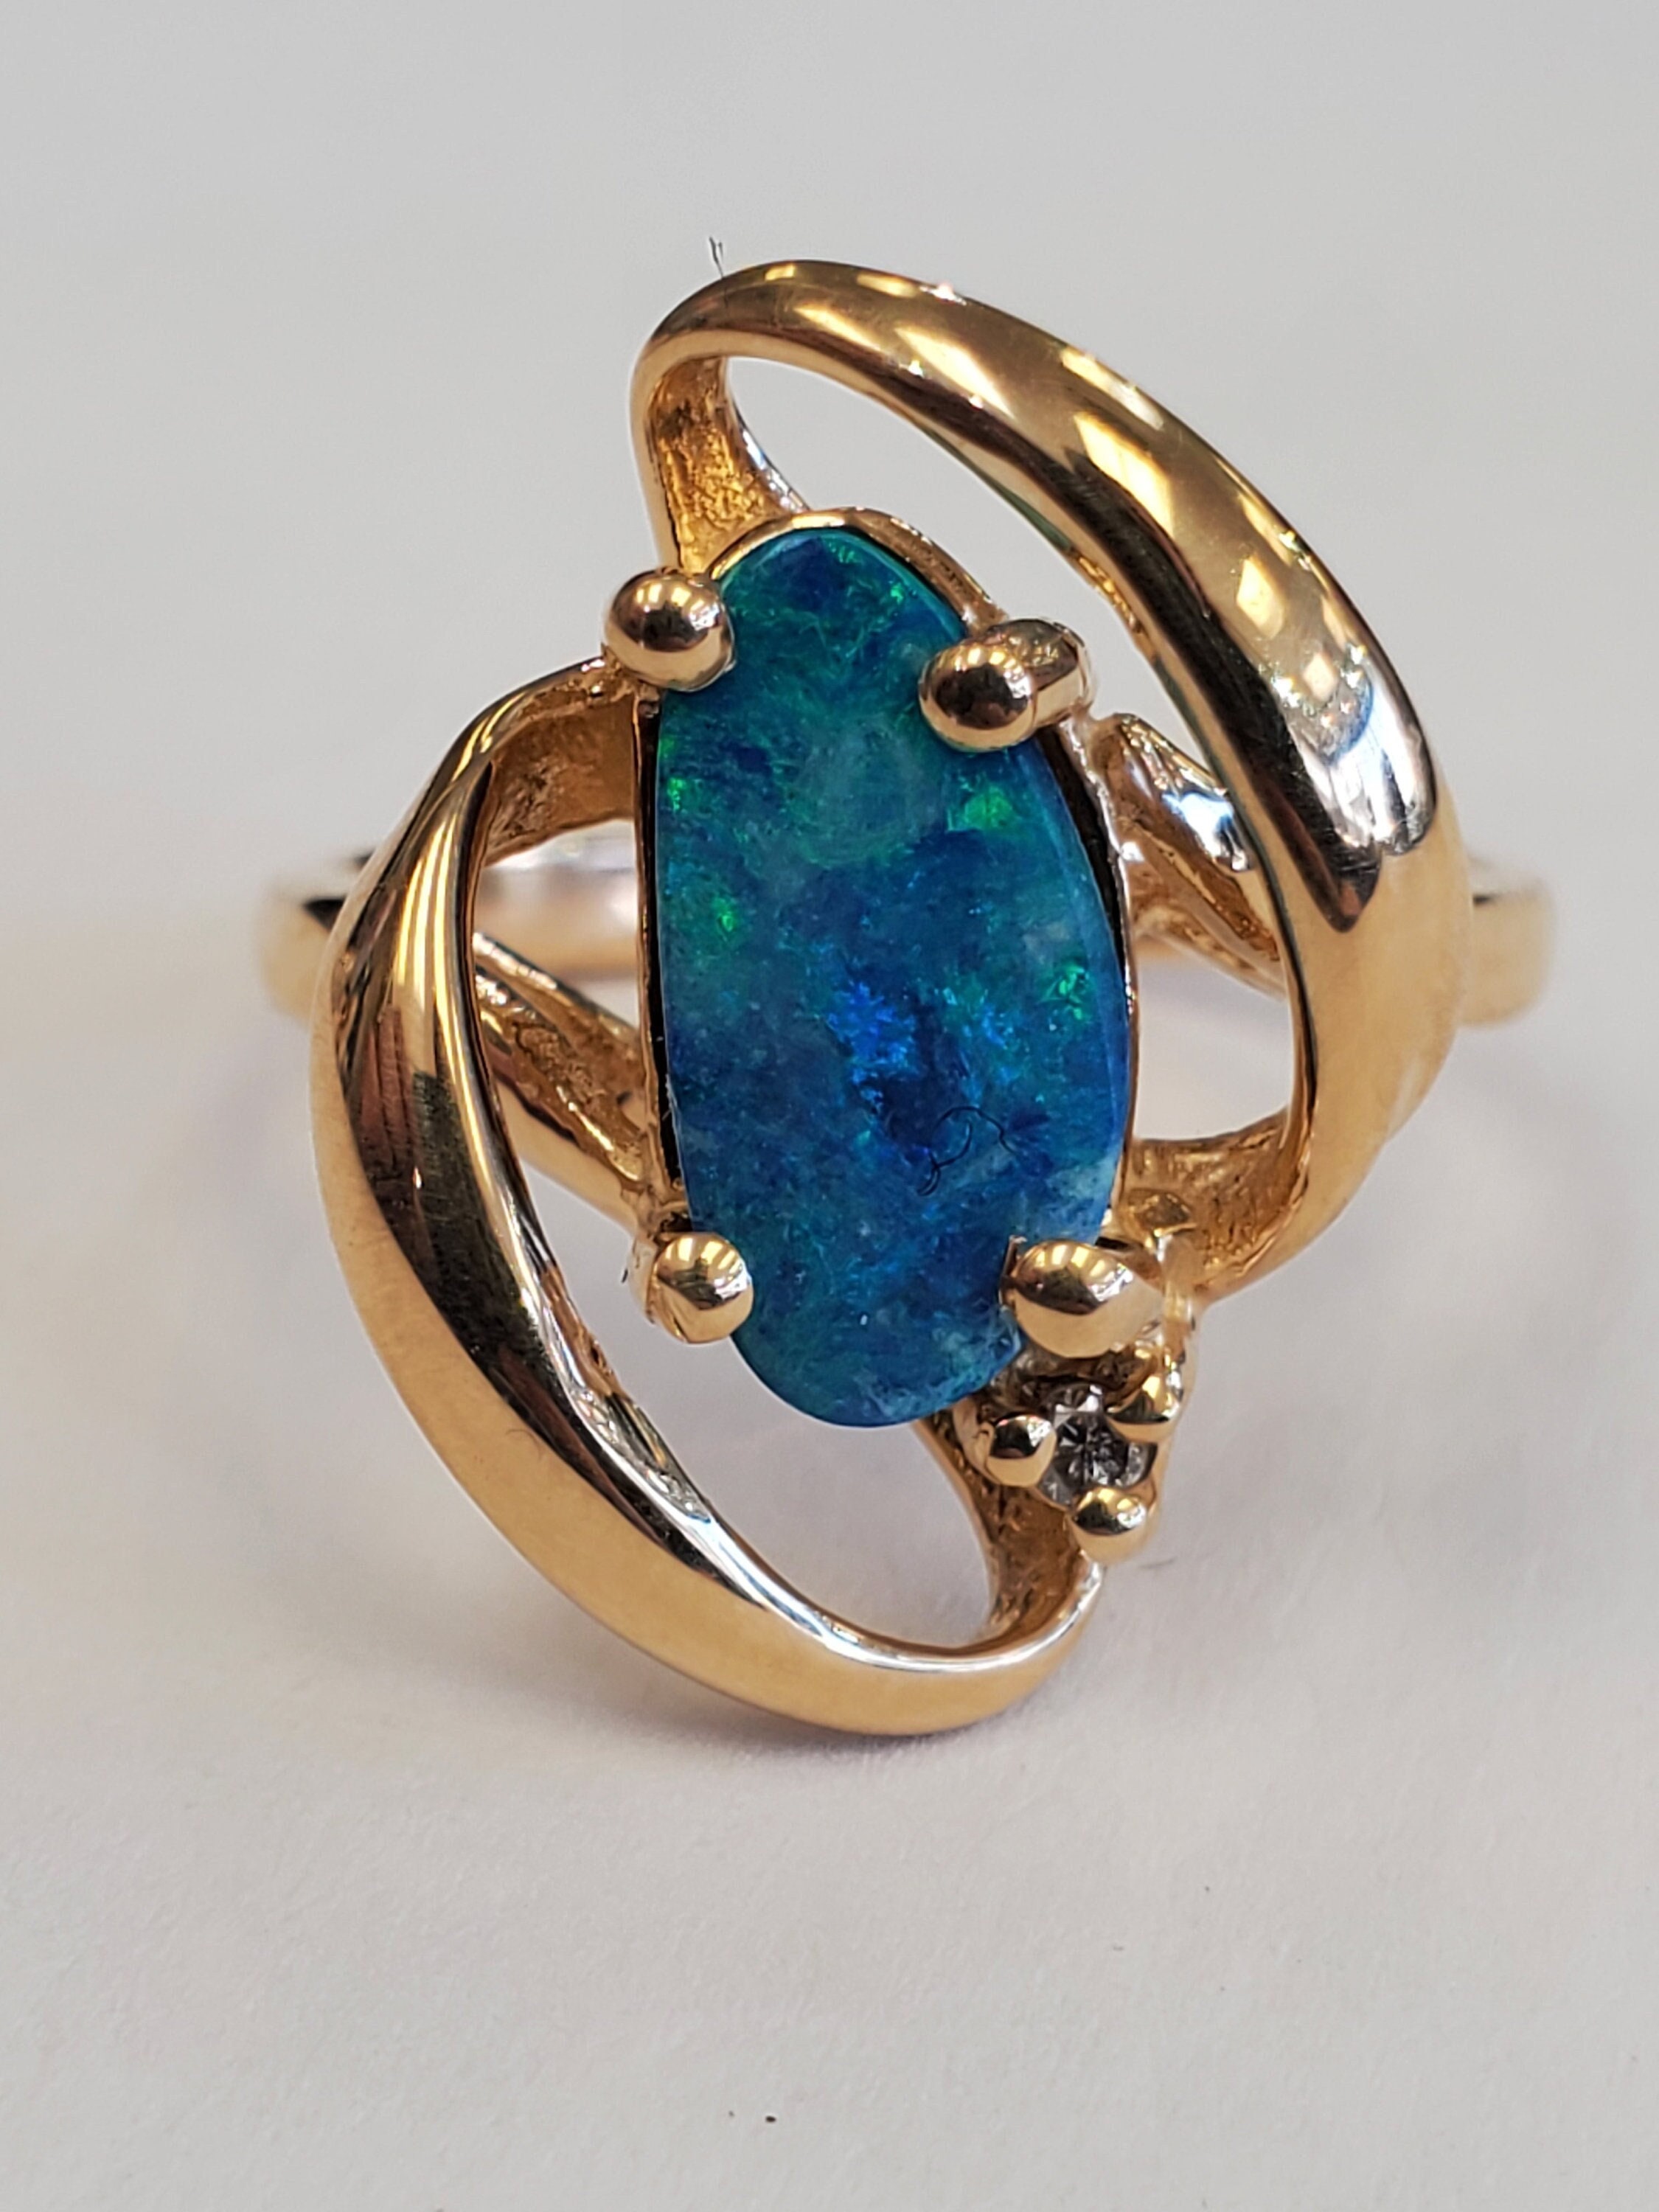 Product Image for Triplet opal and diamond swirl ring 14k yellow gold size 6.25